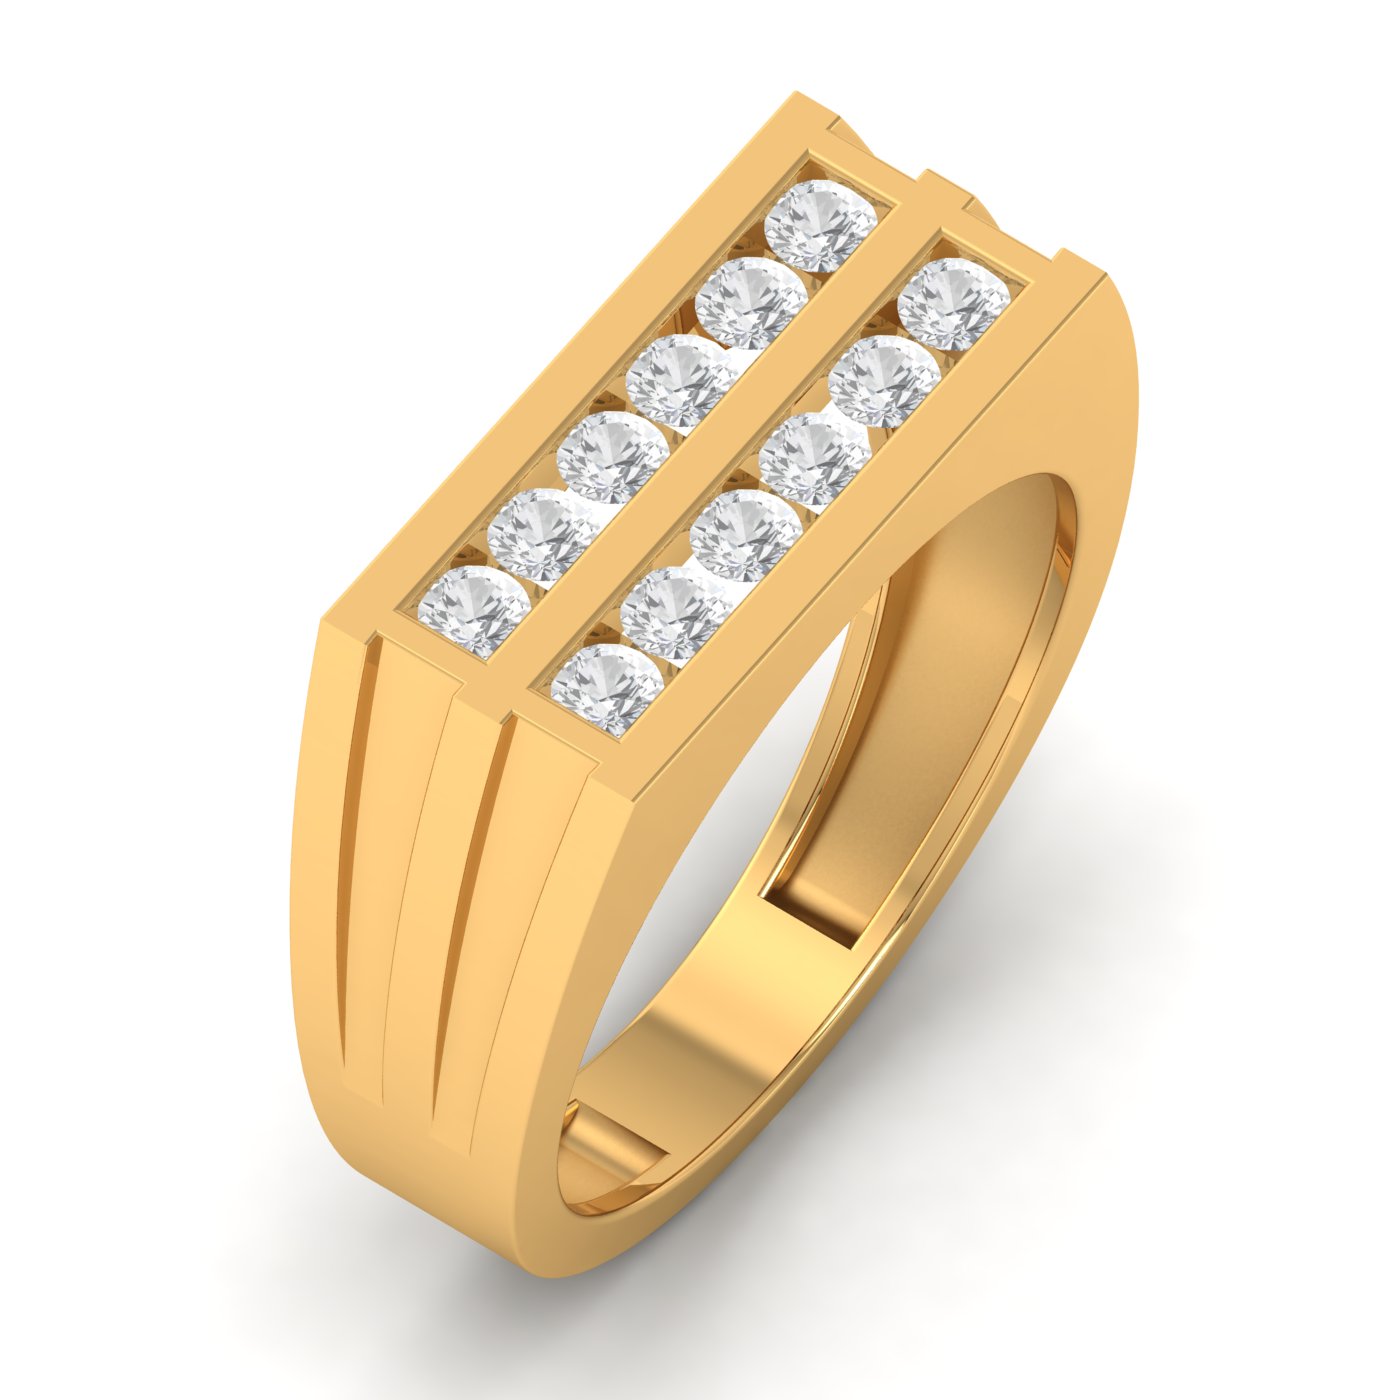 Show Your Love with New Year Gifts for Your Parents || Linear design mens wedding ring ||